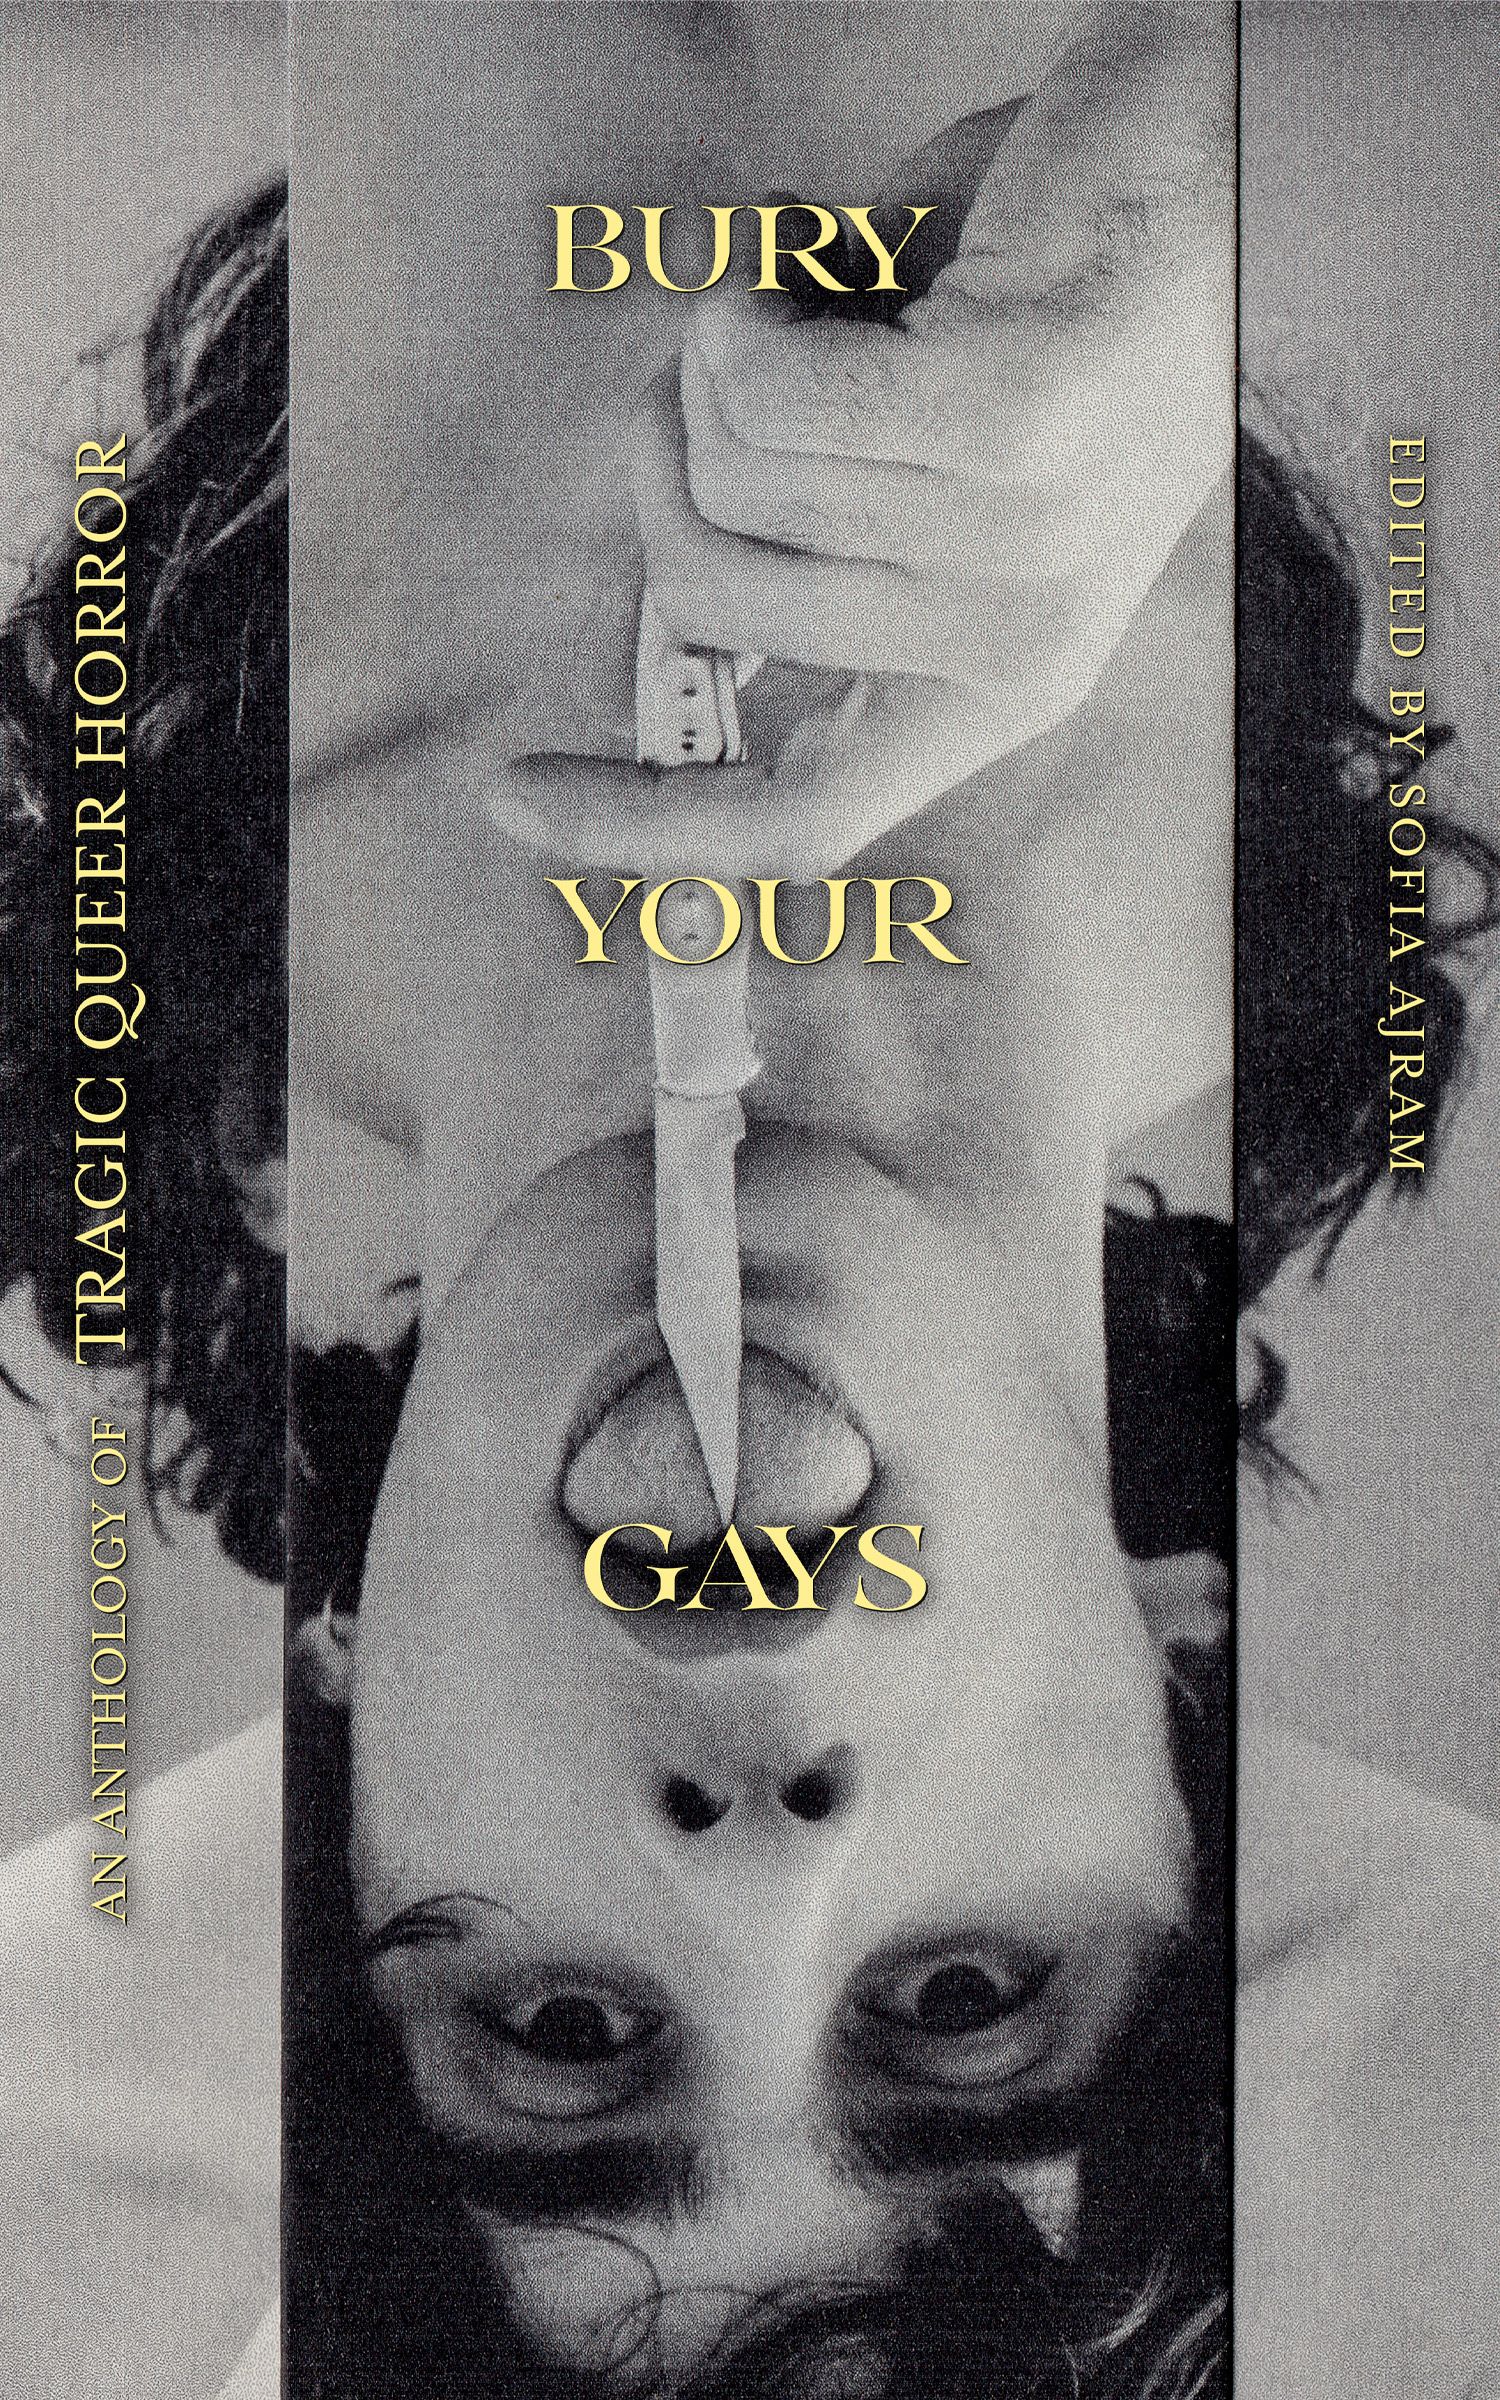 bury your gays book cover